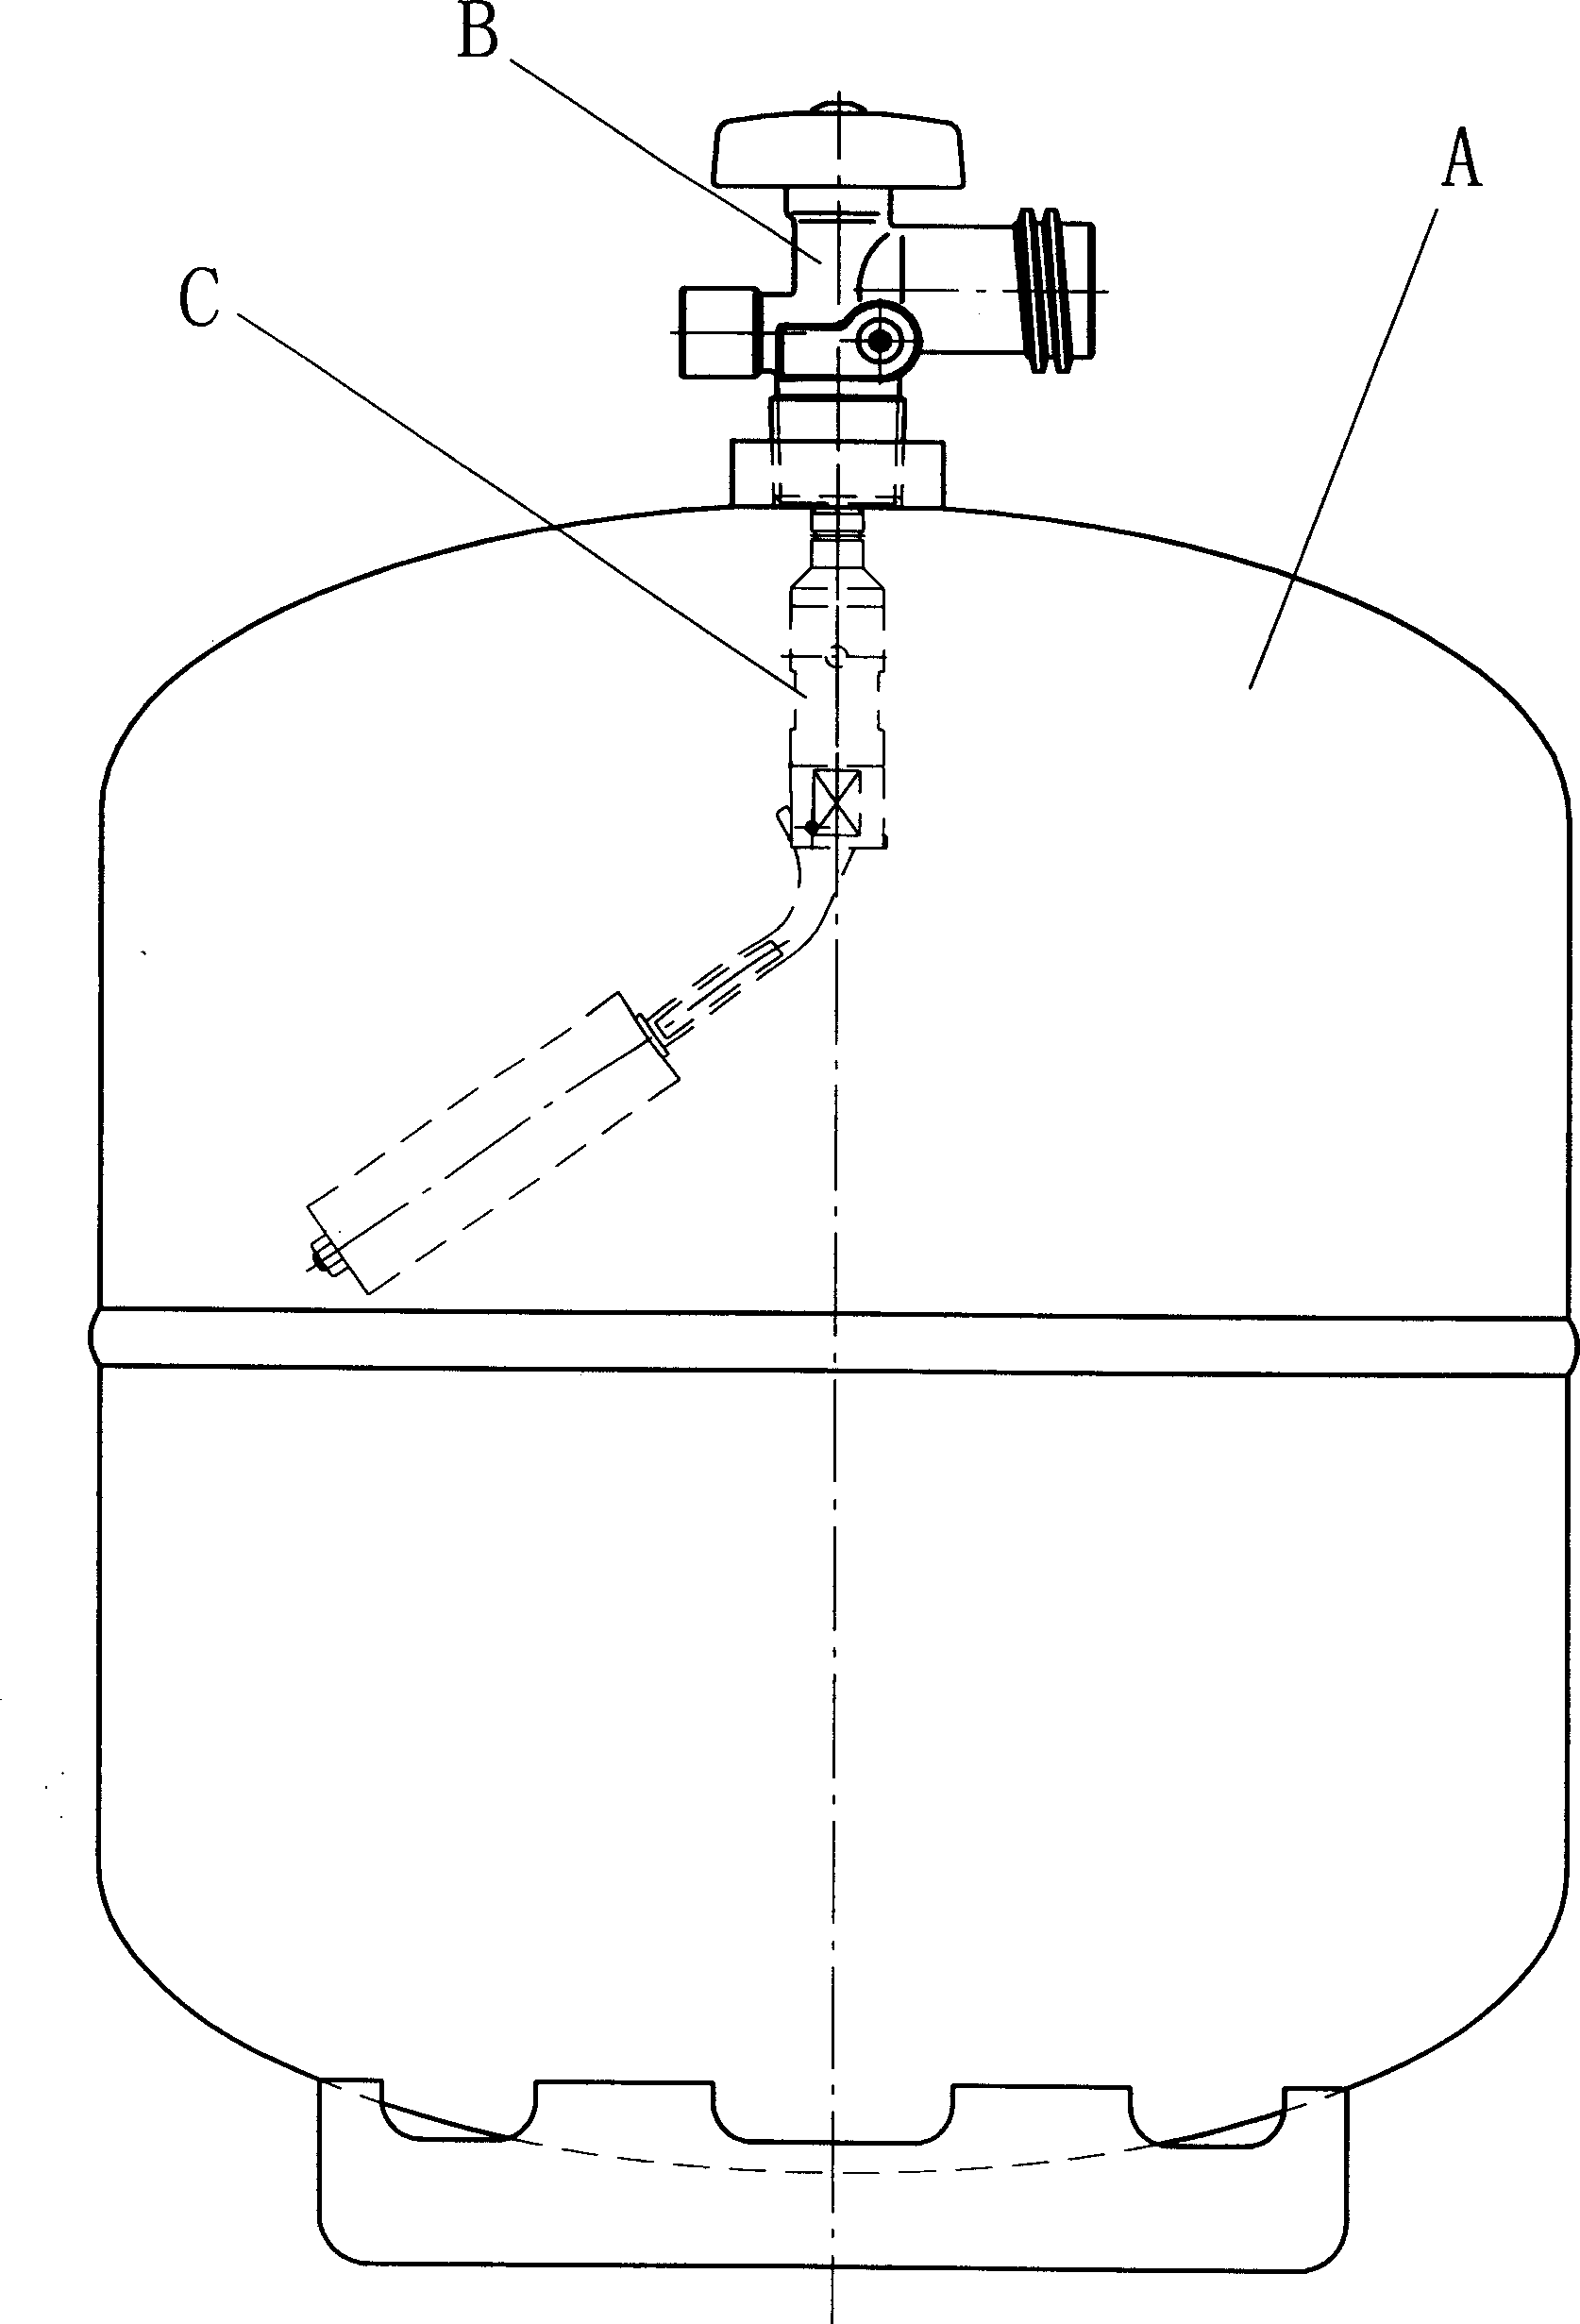 Over-inflation protecting apparatus